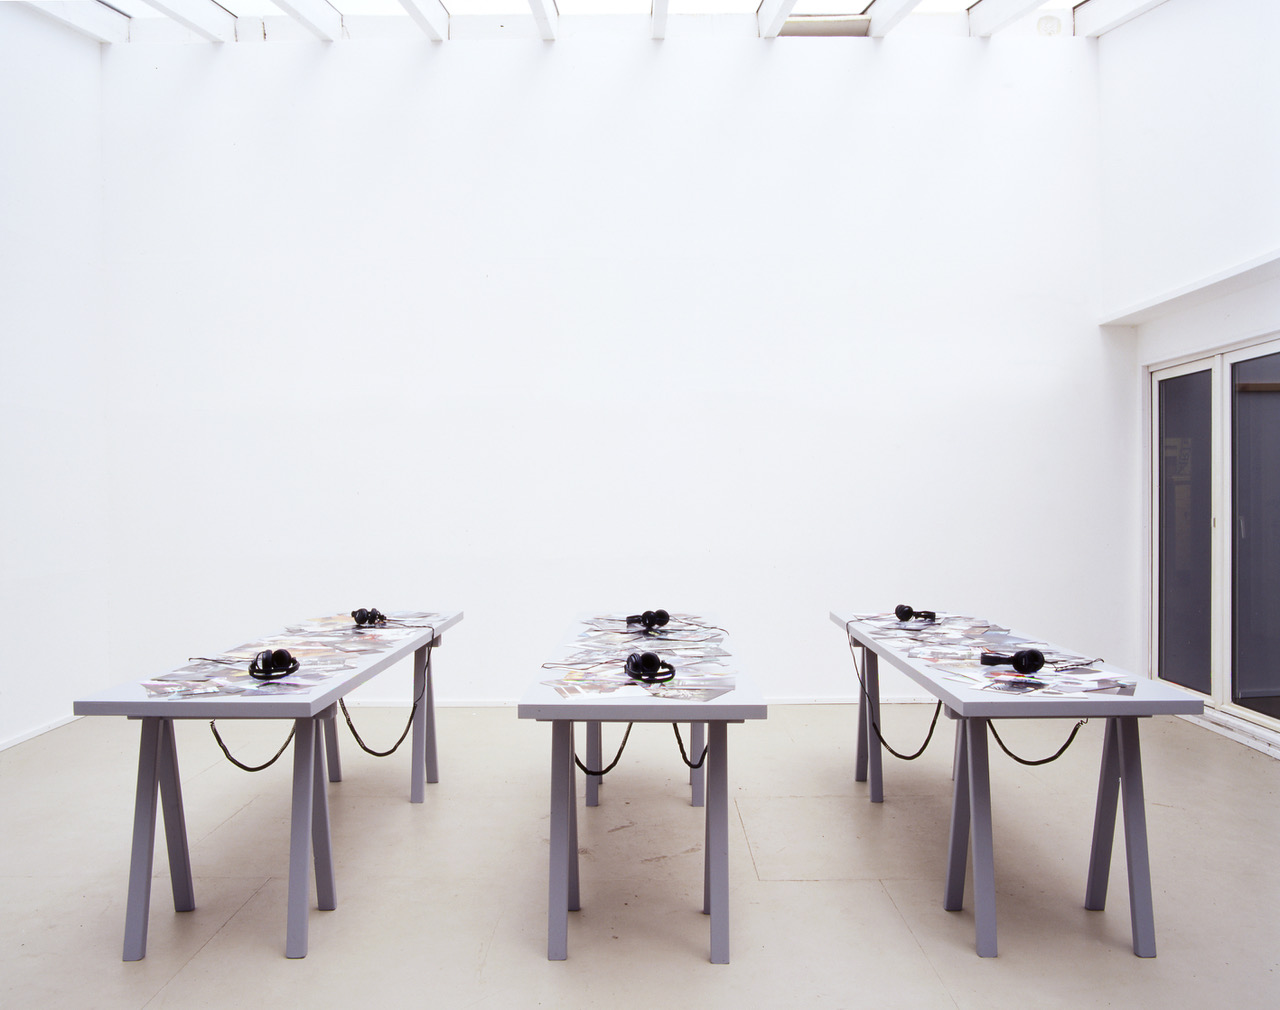 Photograph of the three tables with sets of headphones on them at the PLOTS installation.